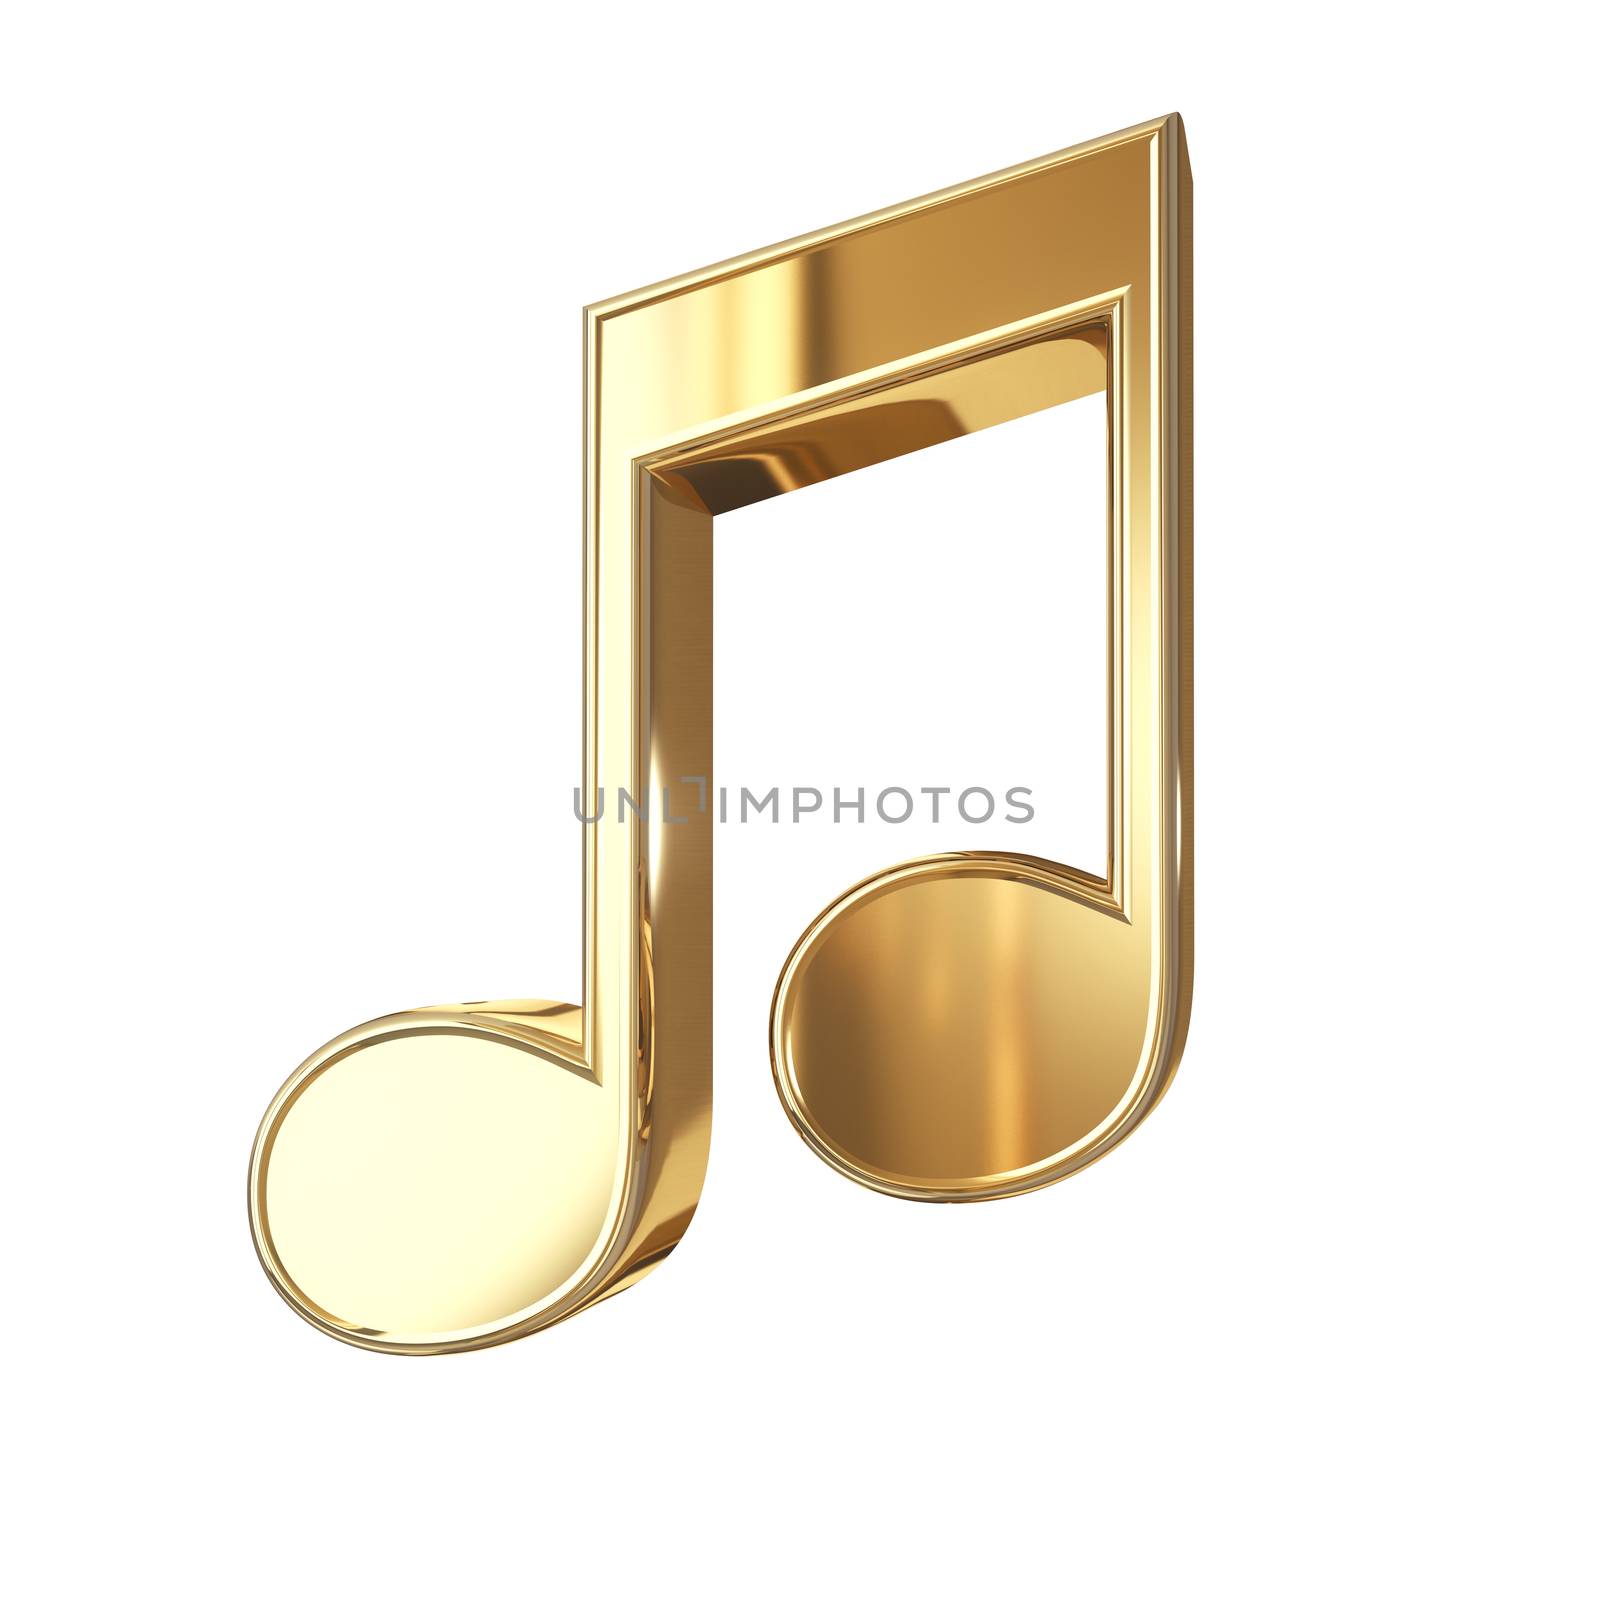 Golden notes symbol with clipping path isolated on white background